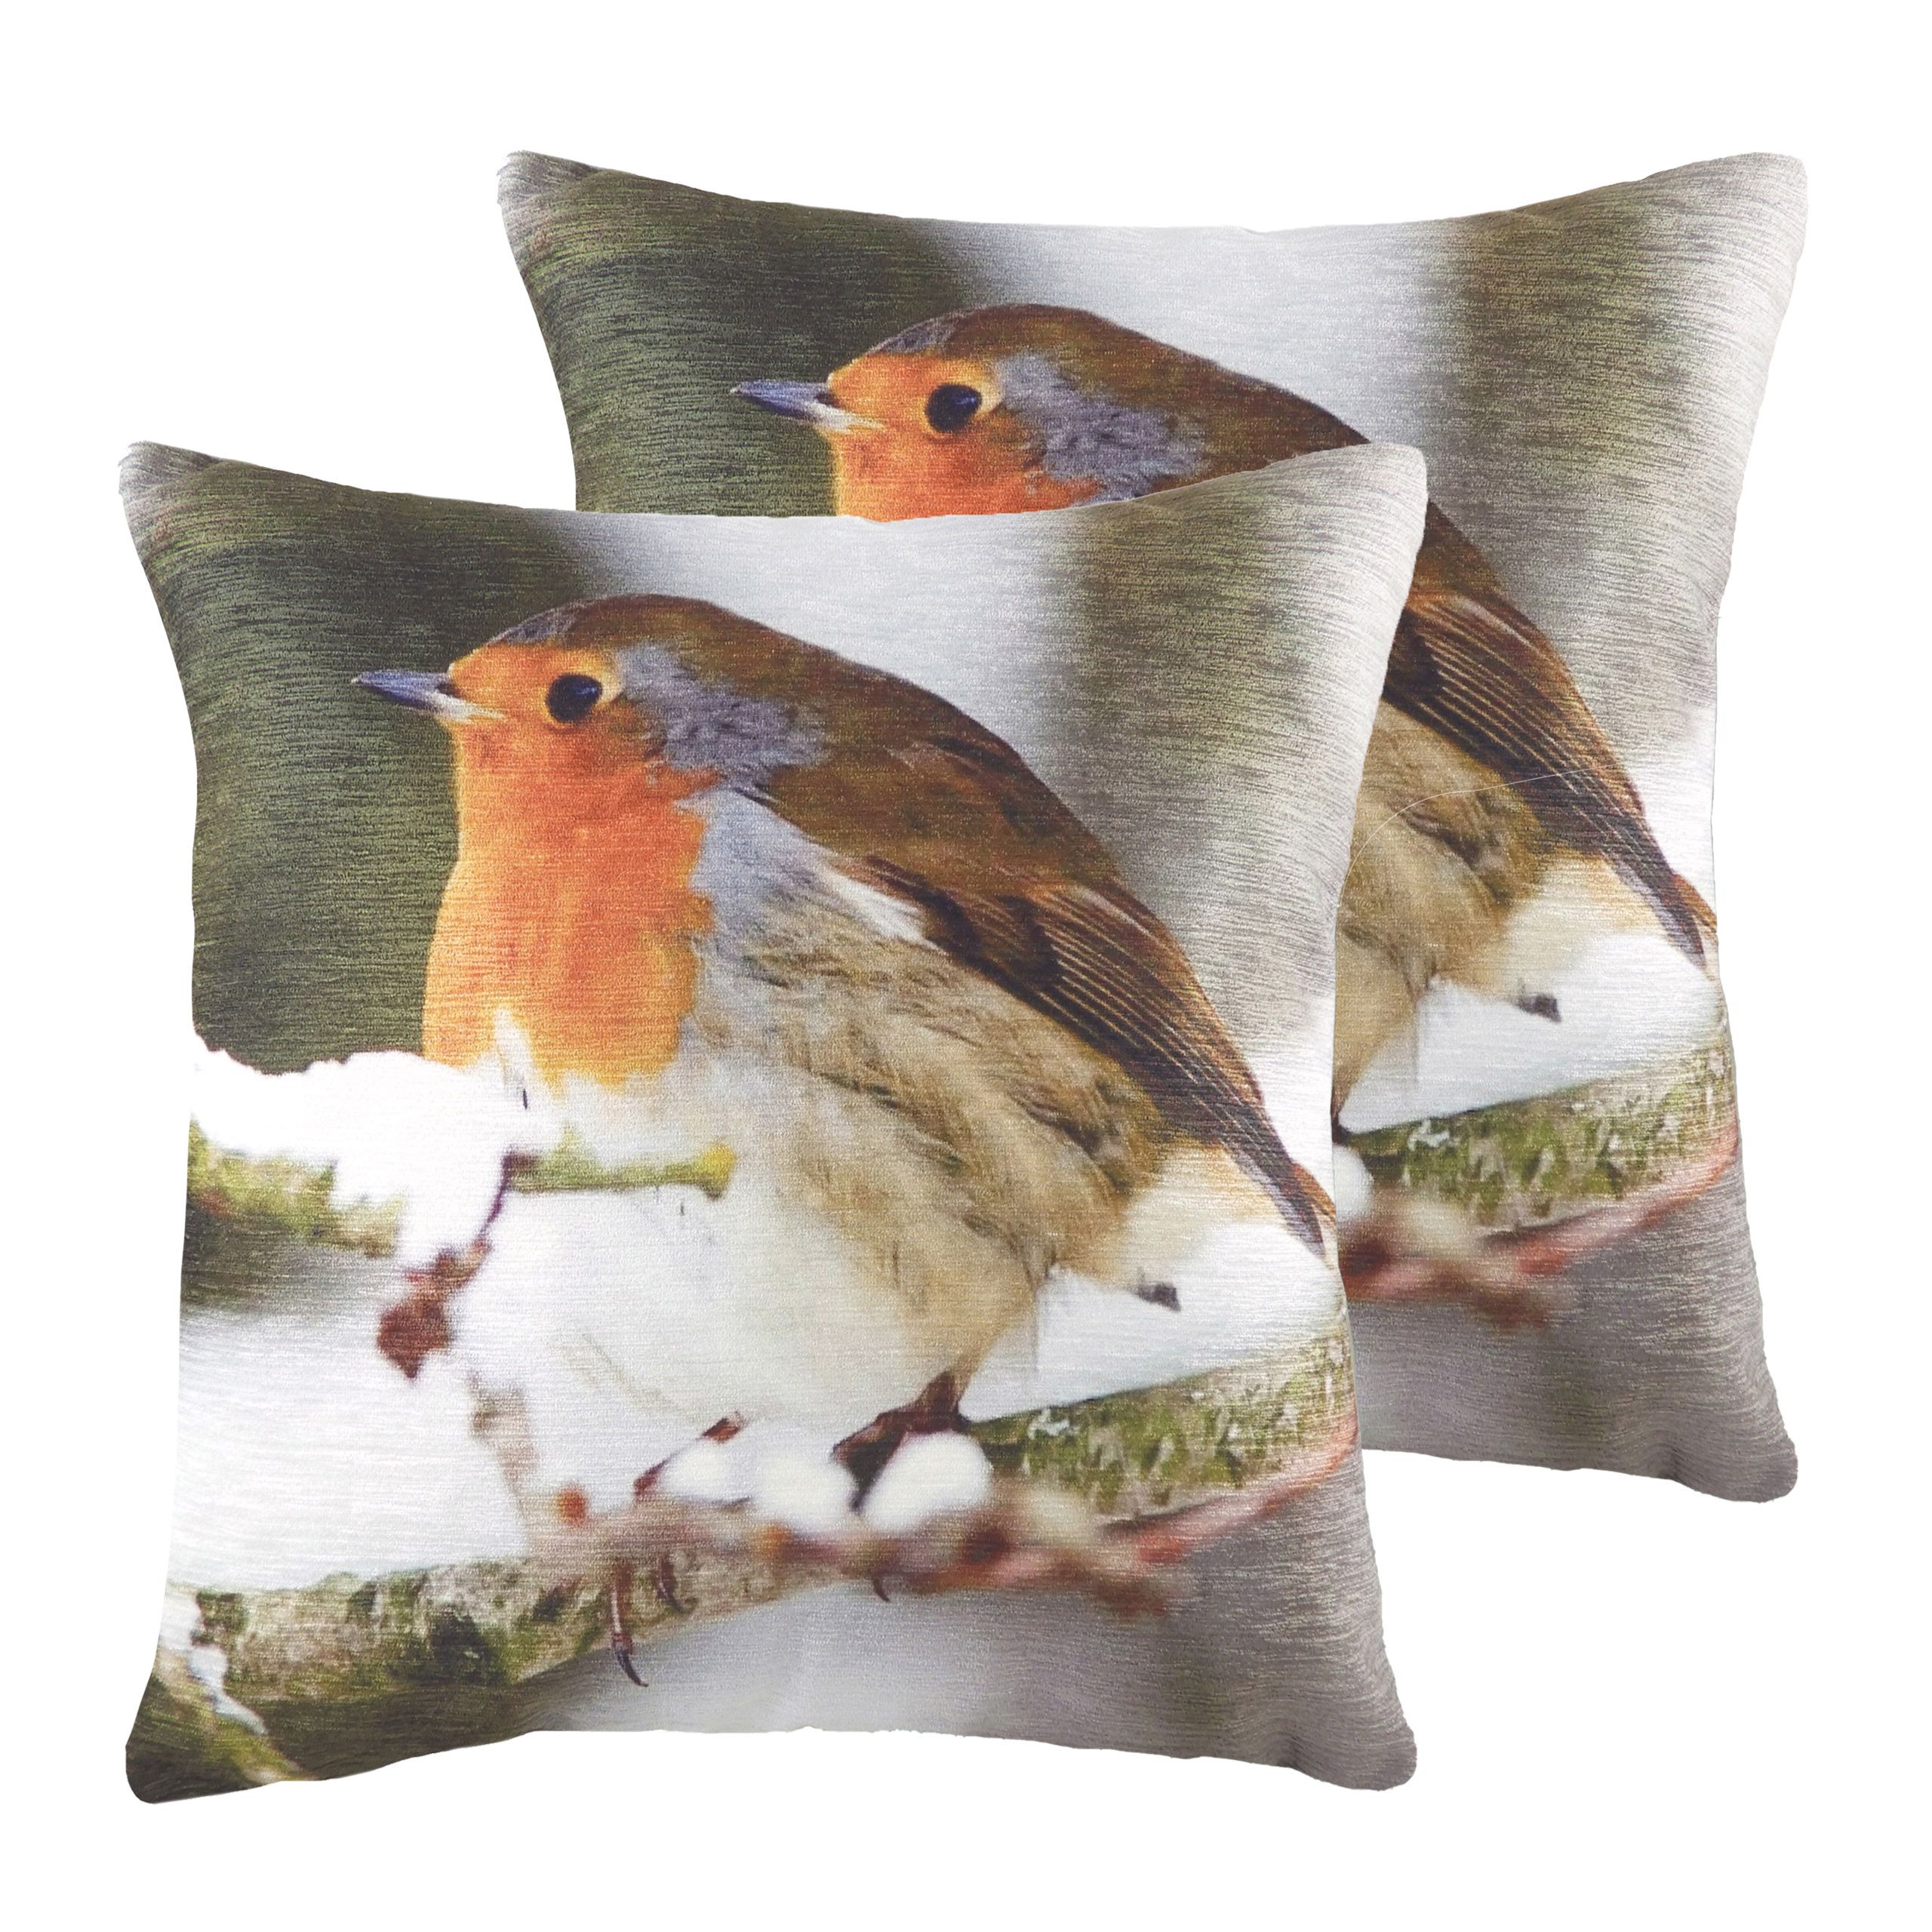 Add some warmth to your home in the colder months with this heart-warming photo cushion of Great British animals. The wintry scene captures the animal in its natural habitat and with a chenille front and velvet reverse this cushion will add character to your interior, pair with other neutral soft furnishings to allow this design to take centre stage.